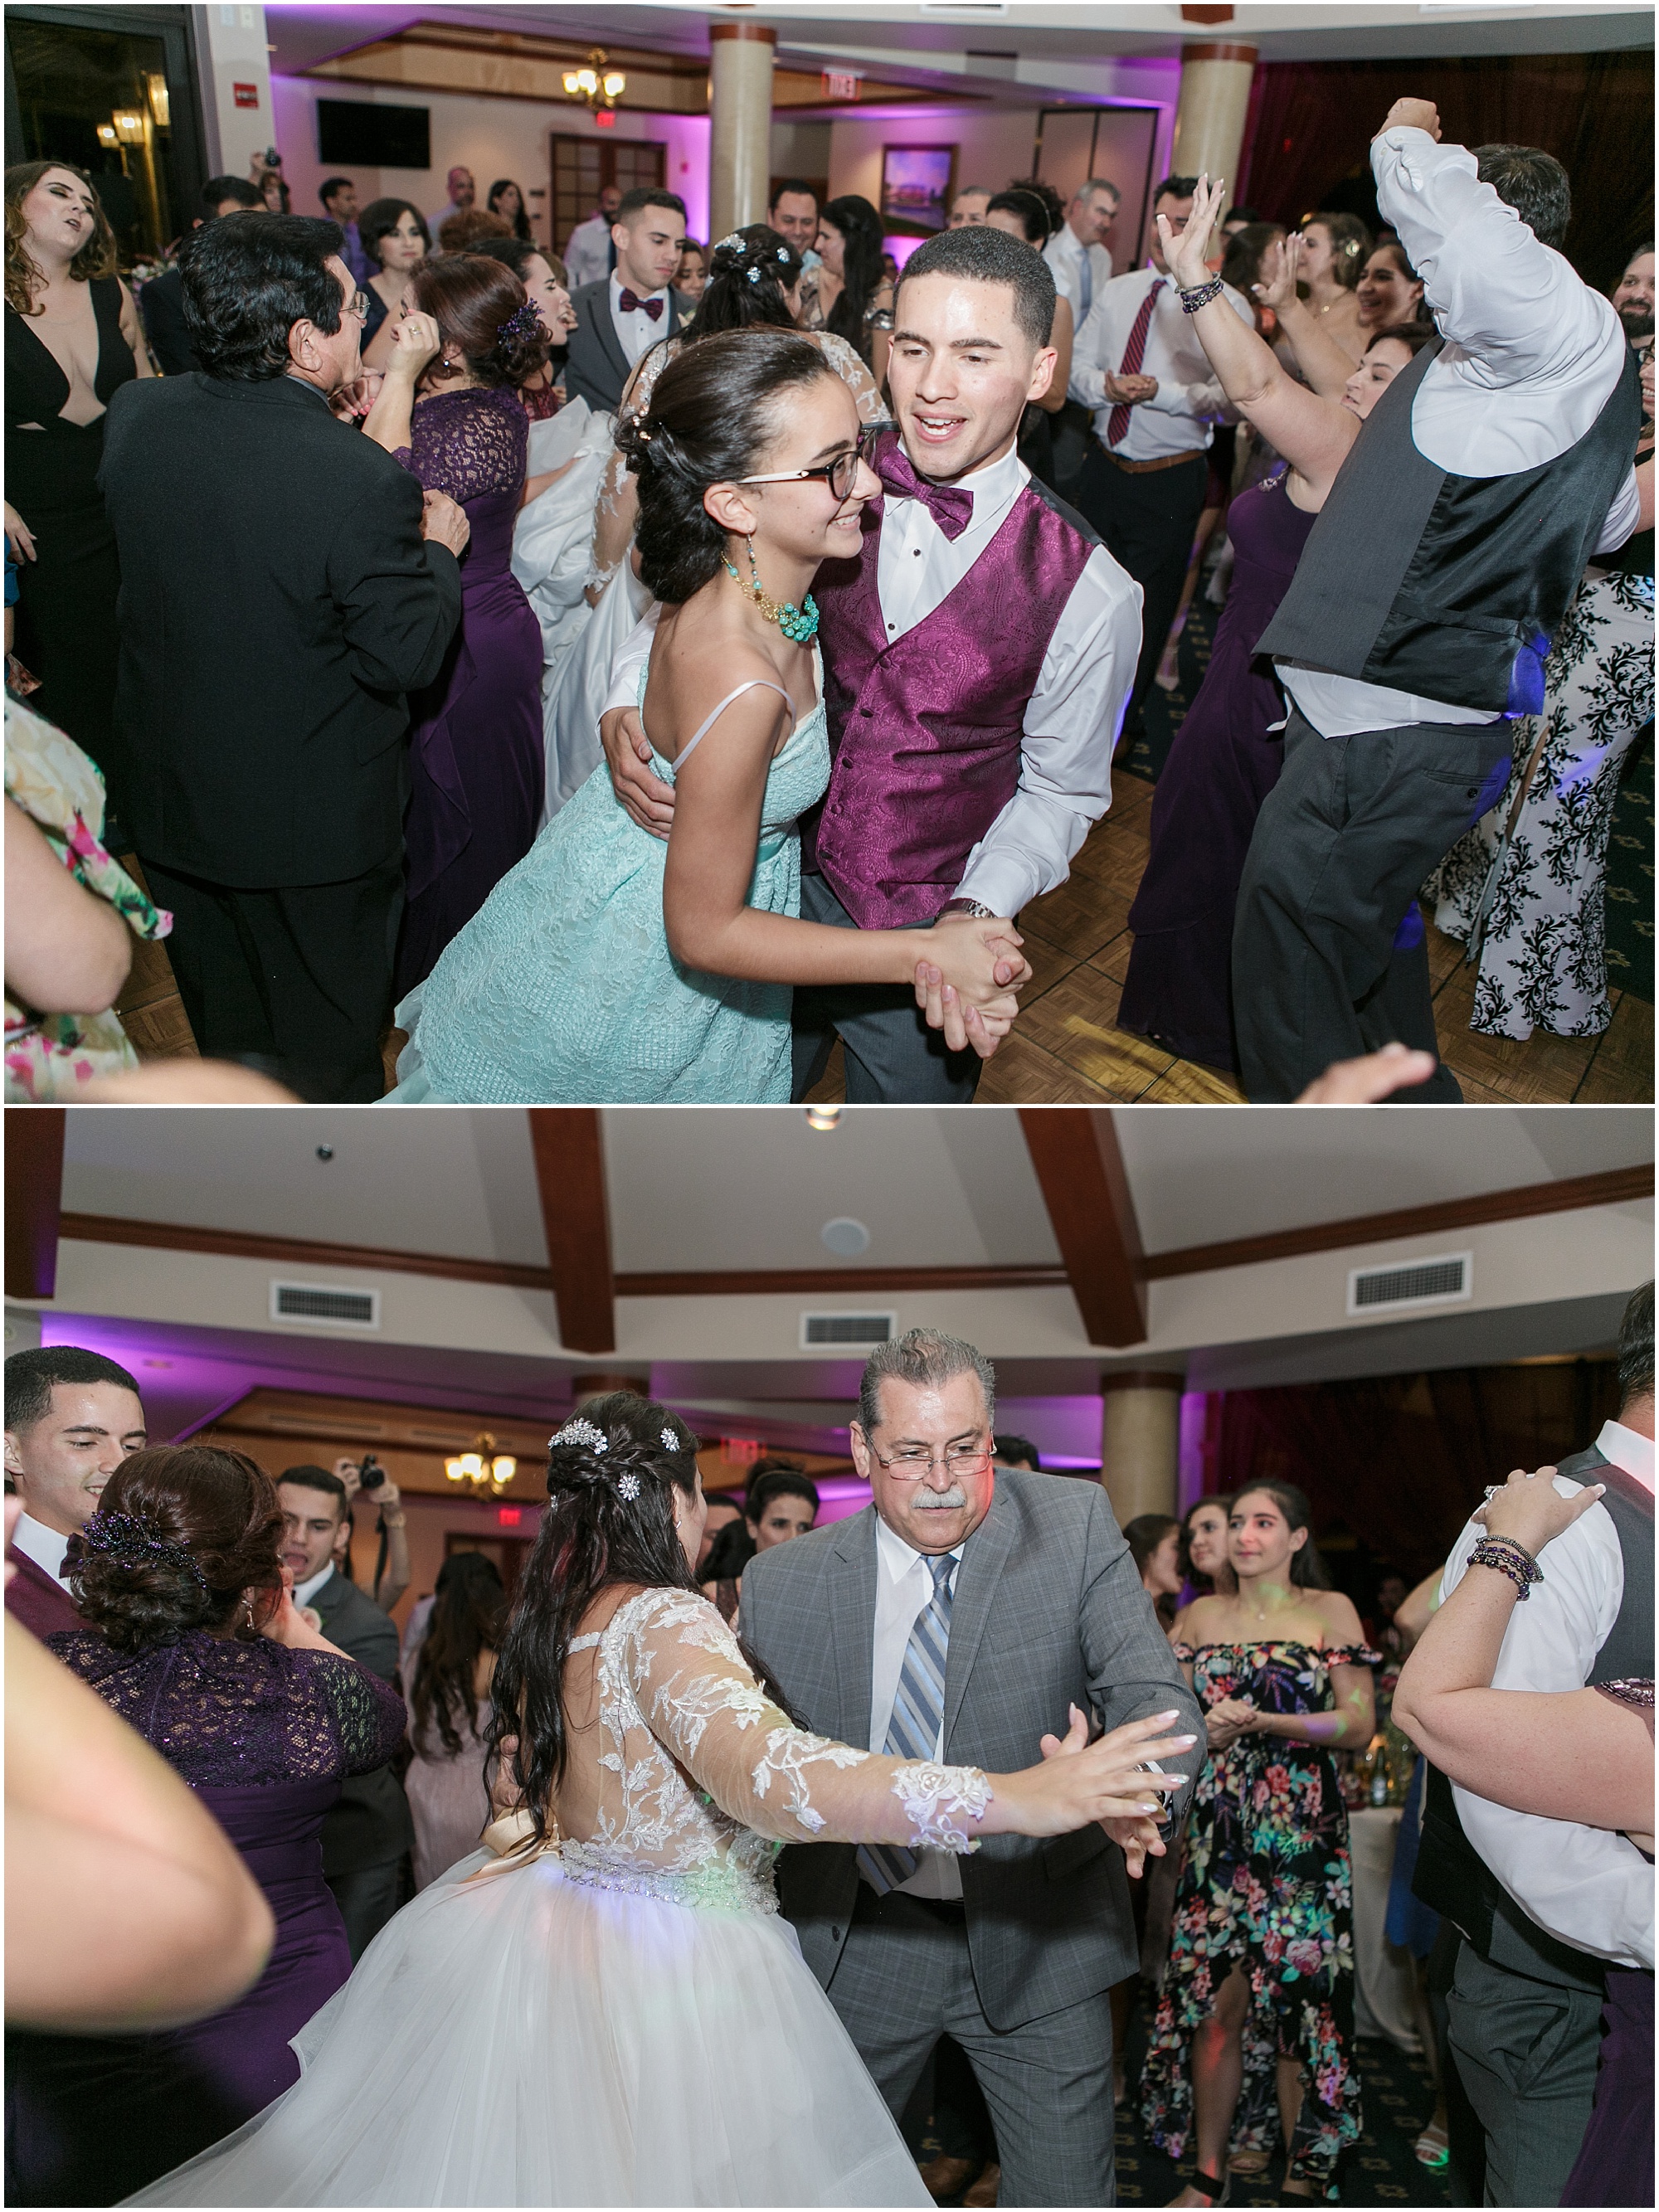 Bride and groom dance with guests at their wedding reception. 